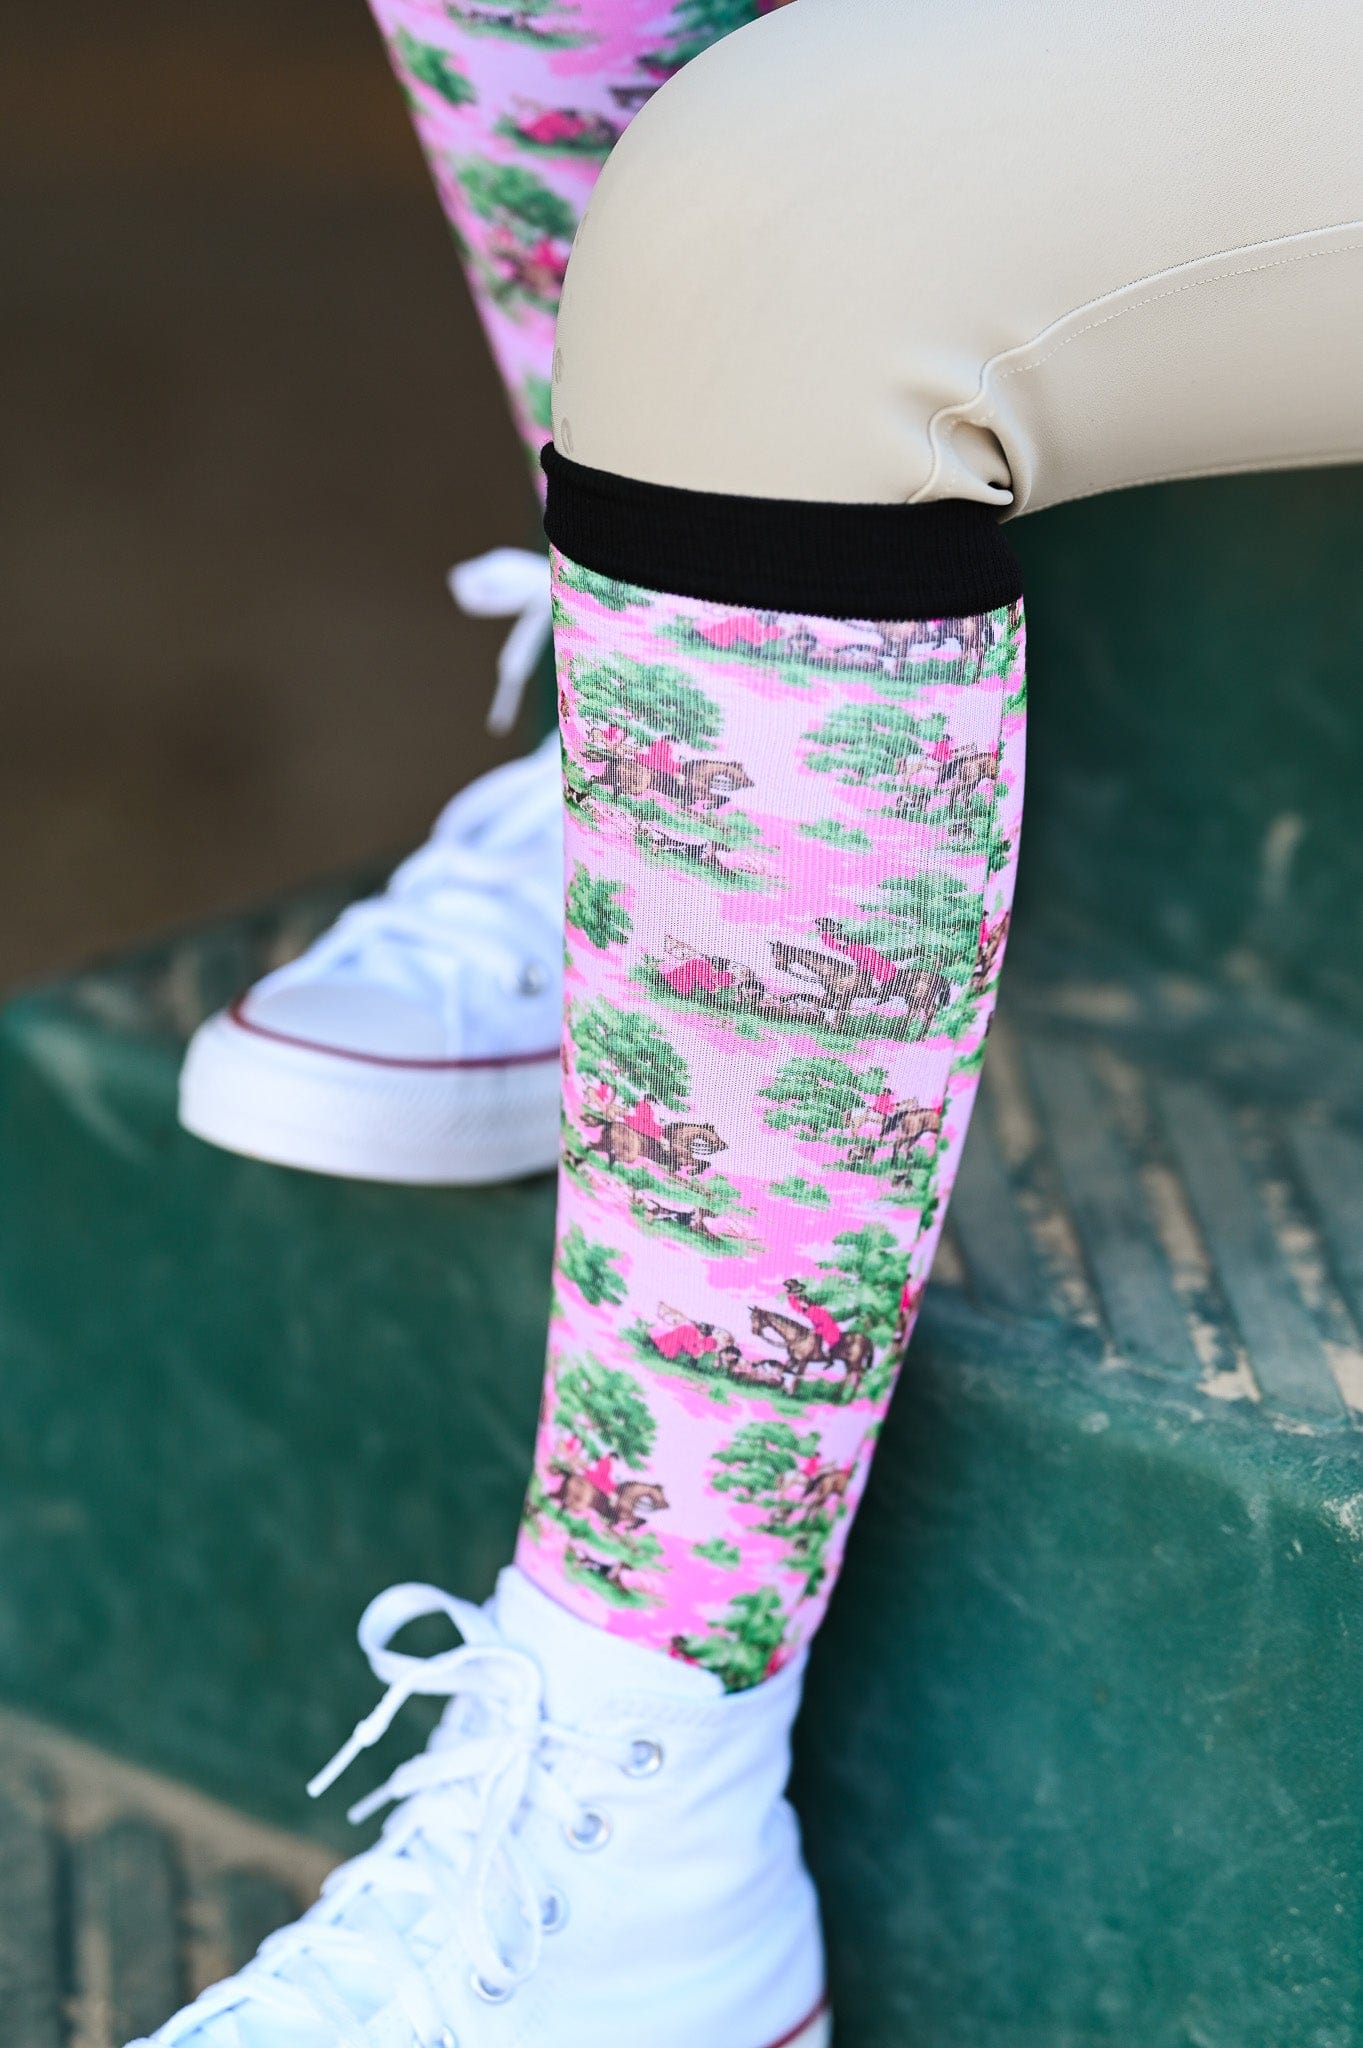 dreamers & schemers Pair & A Spare Pony Mac Pink Tally Ho Pair & a Spare equestrian boot socks boot socks thin socks riding socks pattern socks tall socks funny socks knee high socks horse socks horse show socks